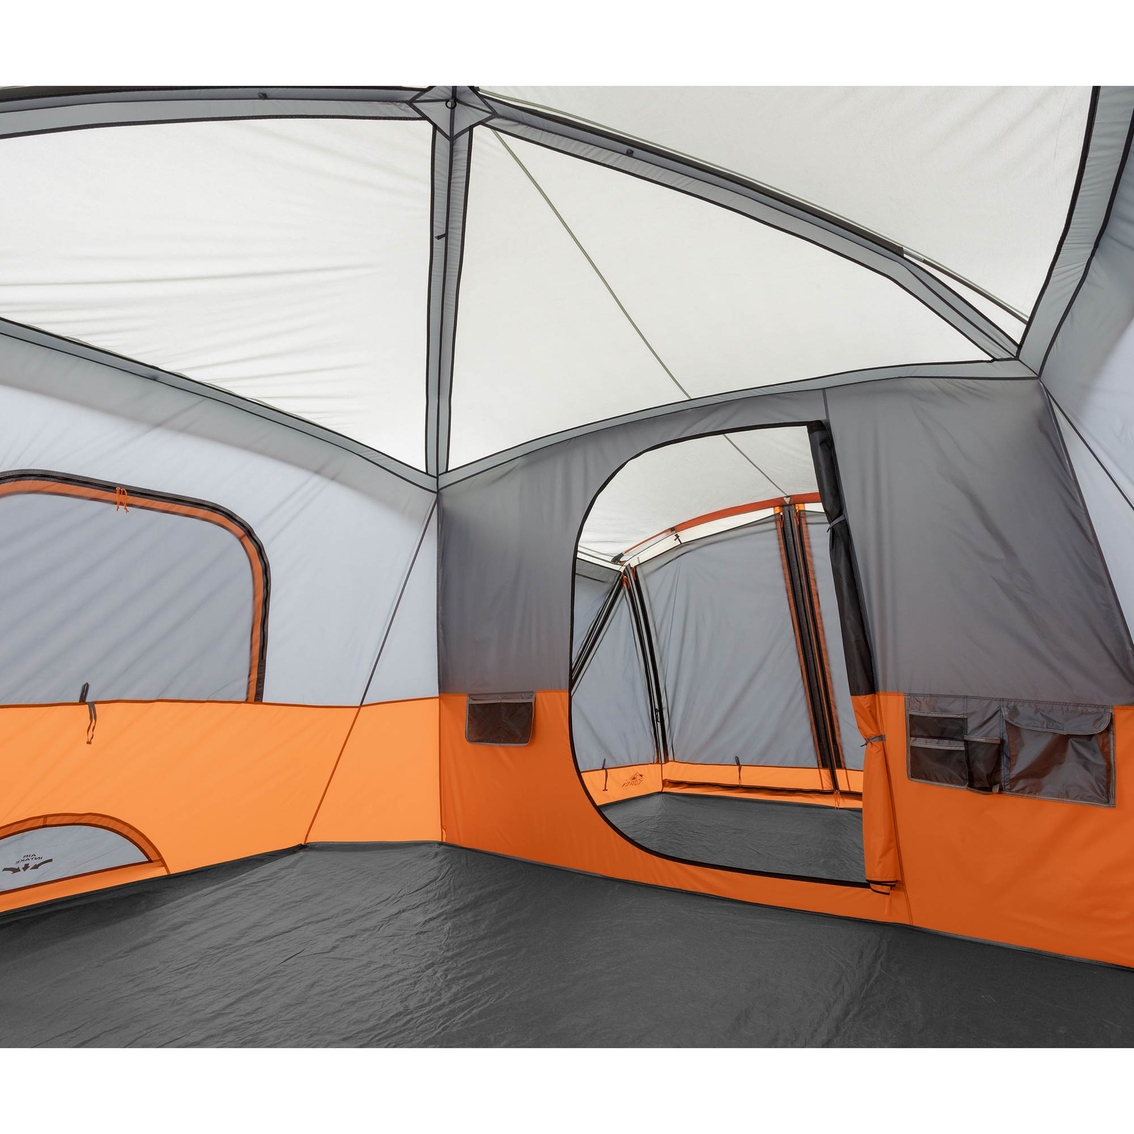 Core Equipment 11 Person Cabin Tent with Screen Room - Image 6 of 10